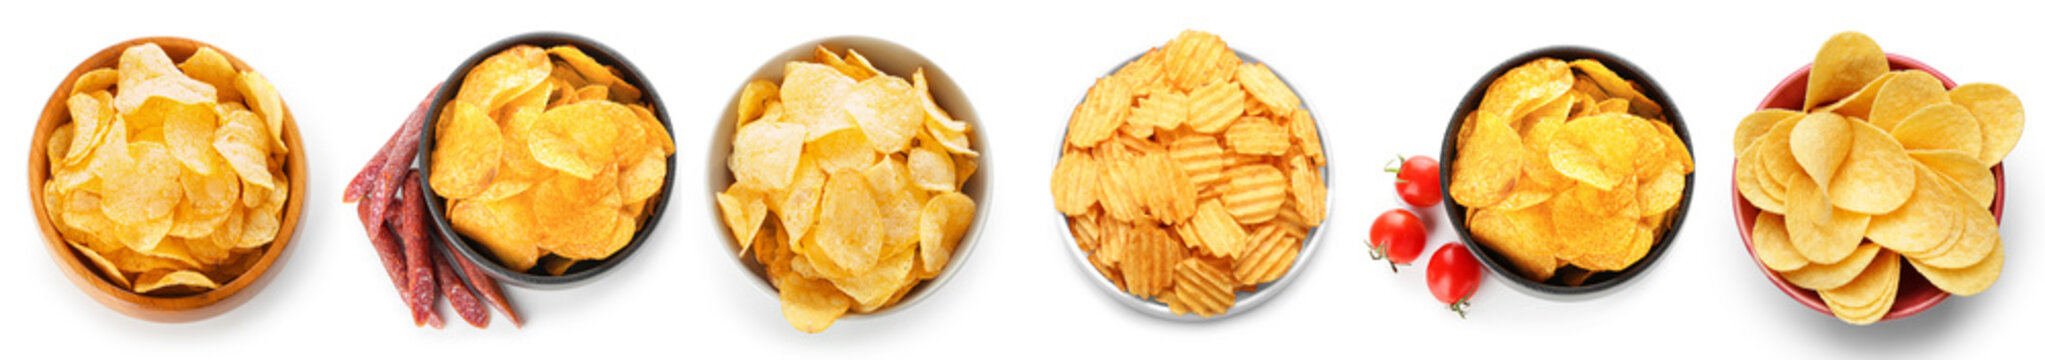 Bowl with different tasty potato chips on white background, top view